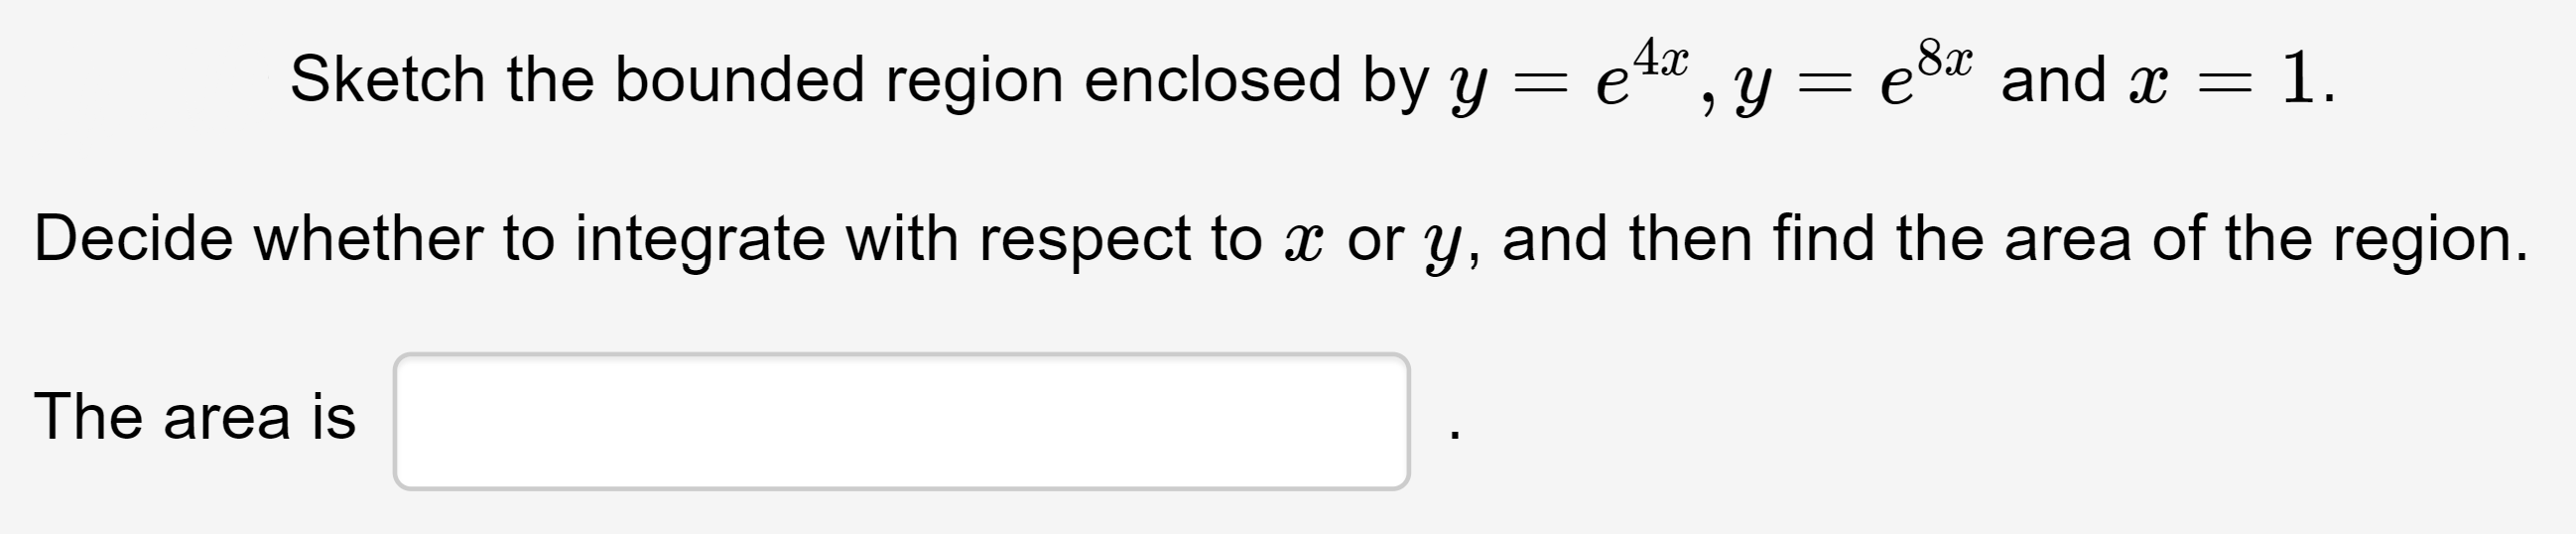 Sketch the bounded region enclosed by y = e4",y = esa and x = 1.
Decide whether to integrate with respect to x or y, and then find the area of the region.
The area is
